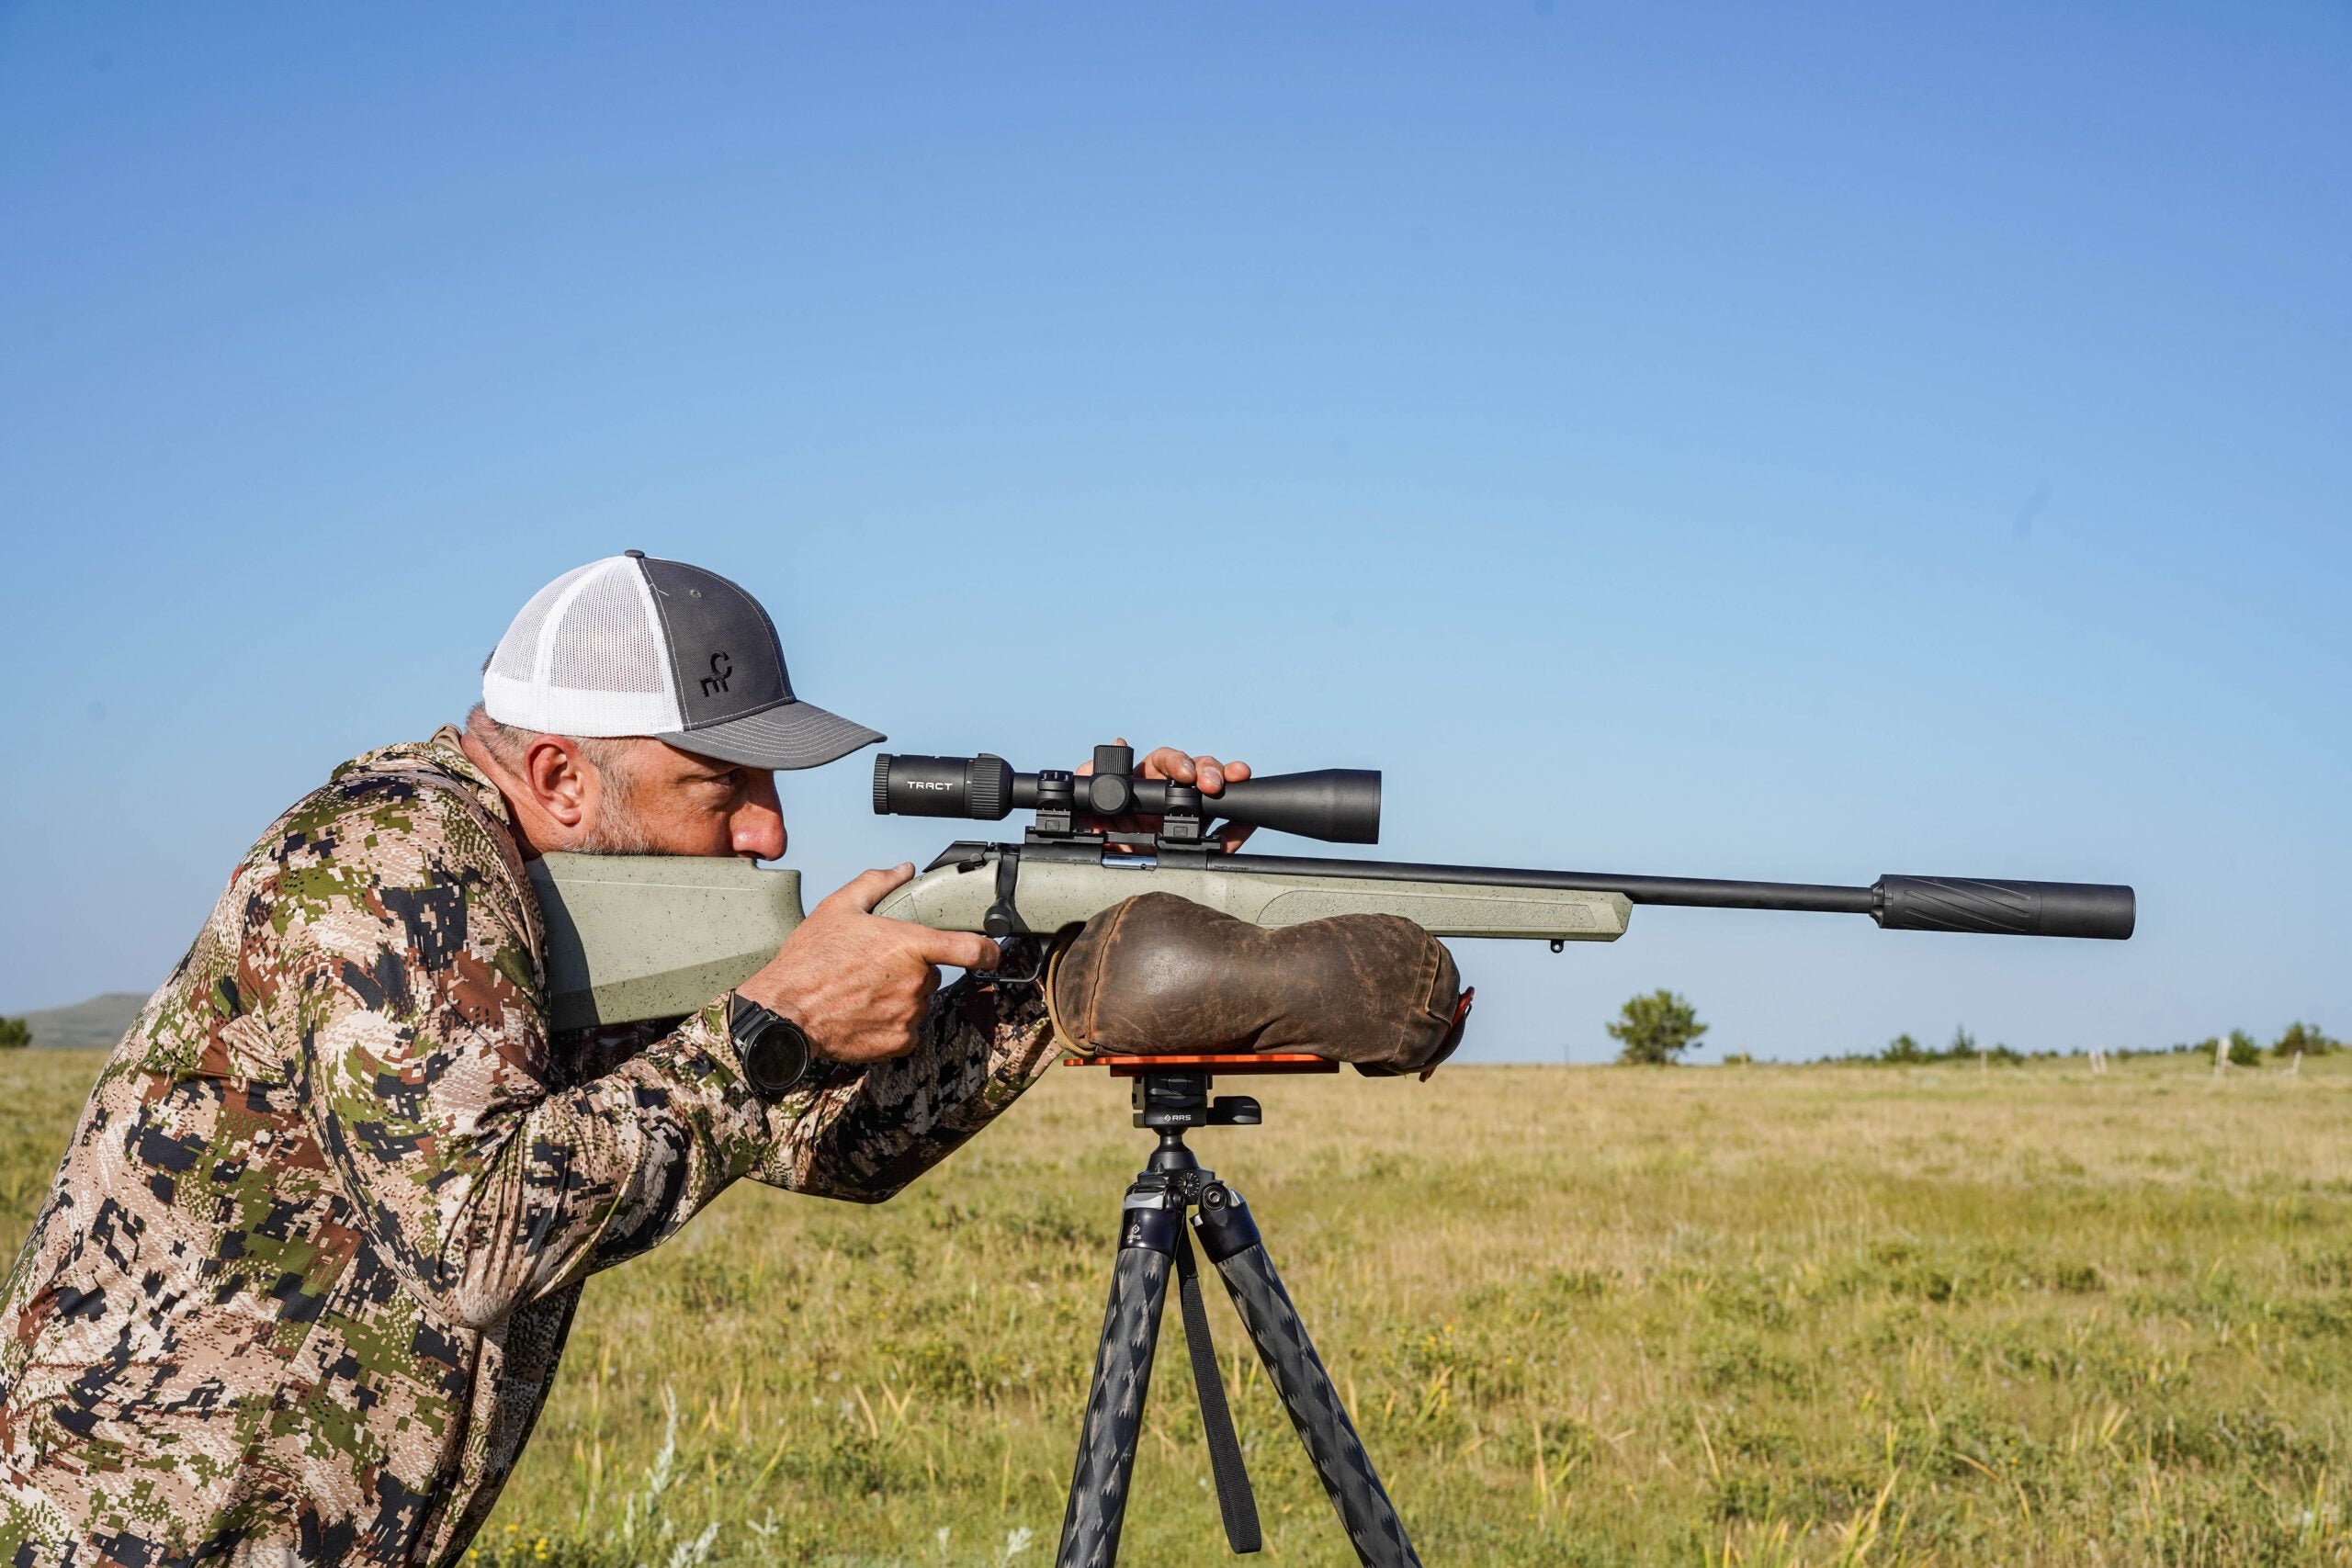 Testing the Tract budget rifle scope